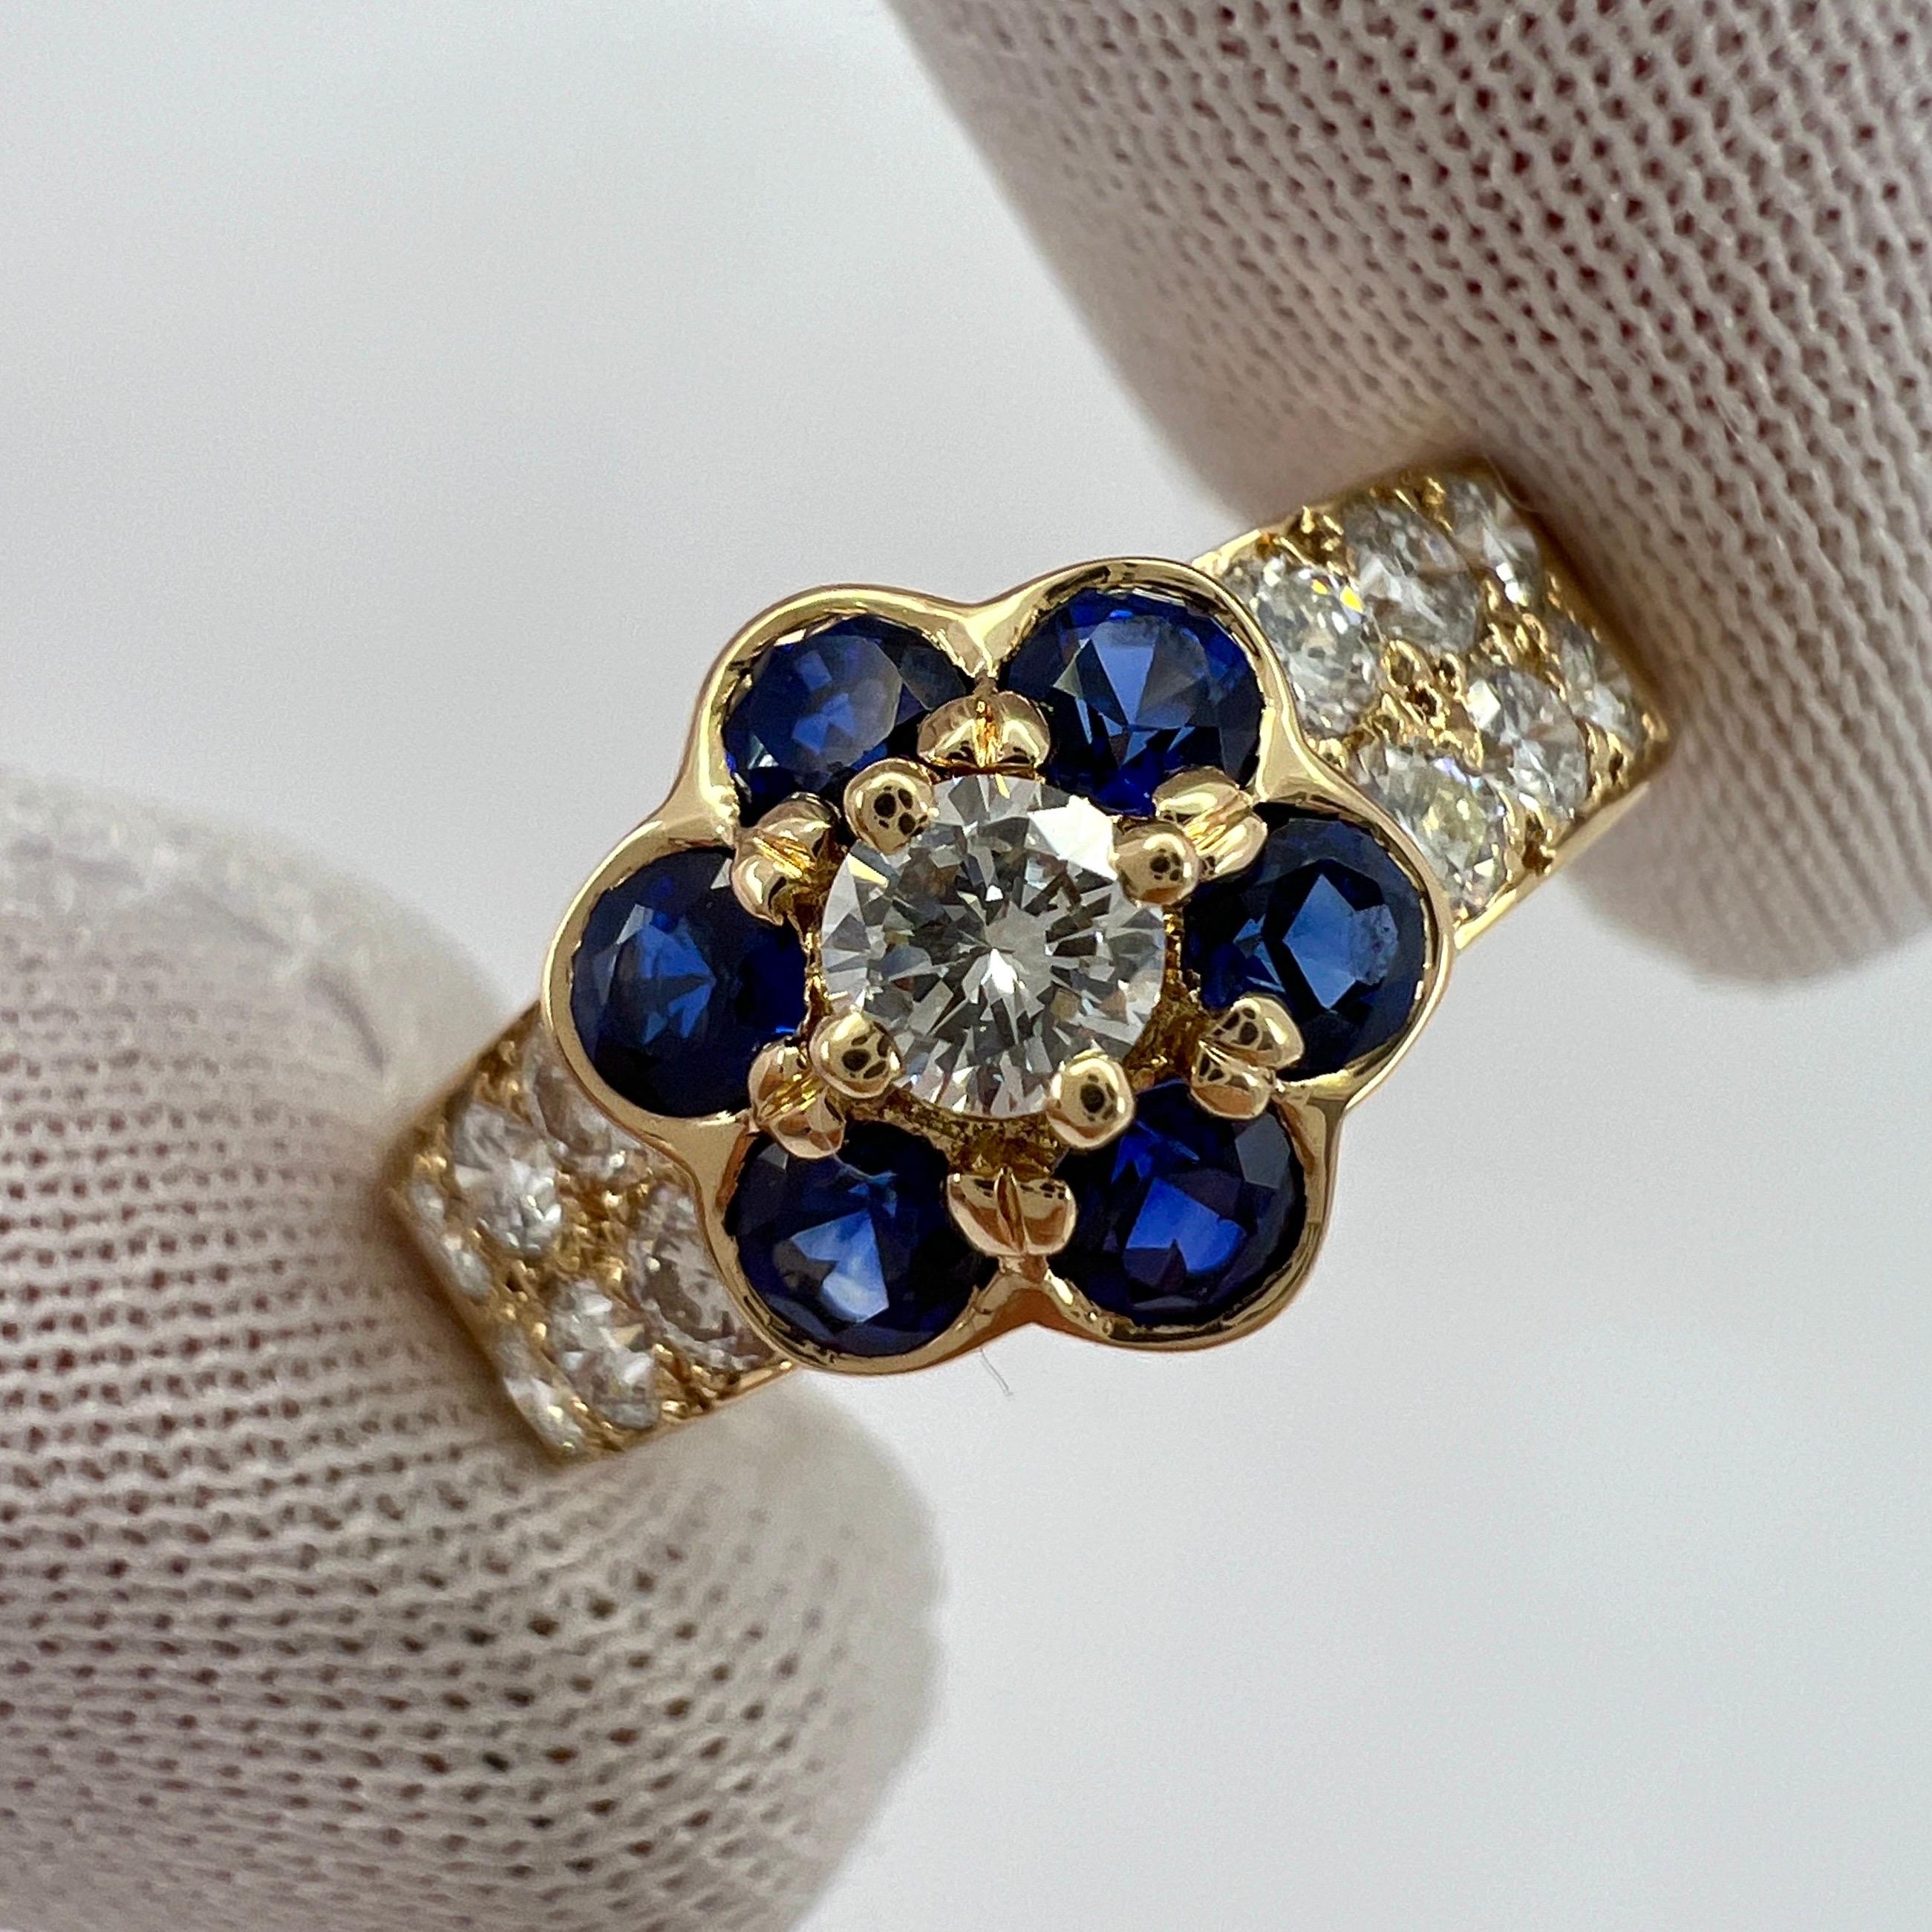 Fine Vintage Van Cleef & Arpels Blue Sapphire And Diamond 18k Yellow Gold Fleurette Flower Ring.

A stunning vintage ring with a unique floral design typical of Van Cleef & Arpels, set with beautiful natural round cut blue sapphire and diamonds in a